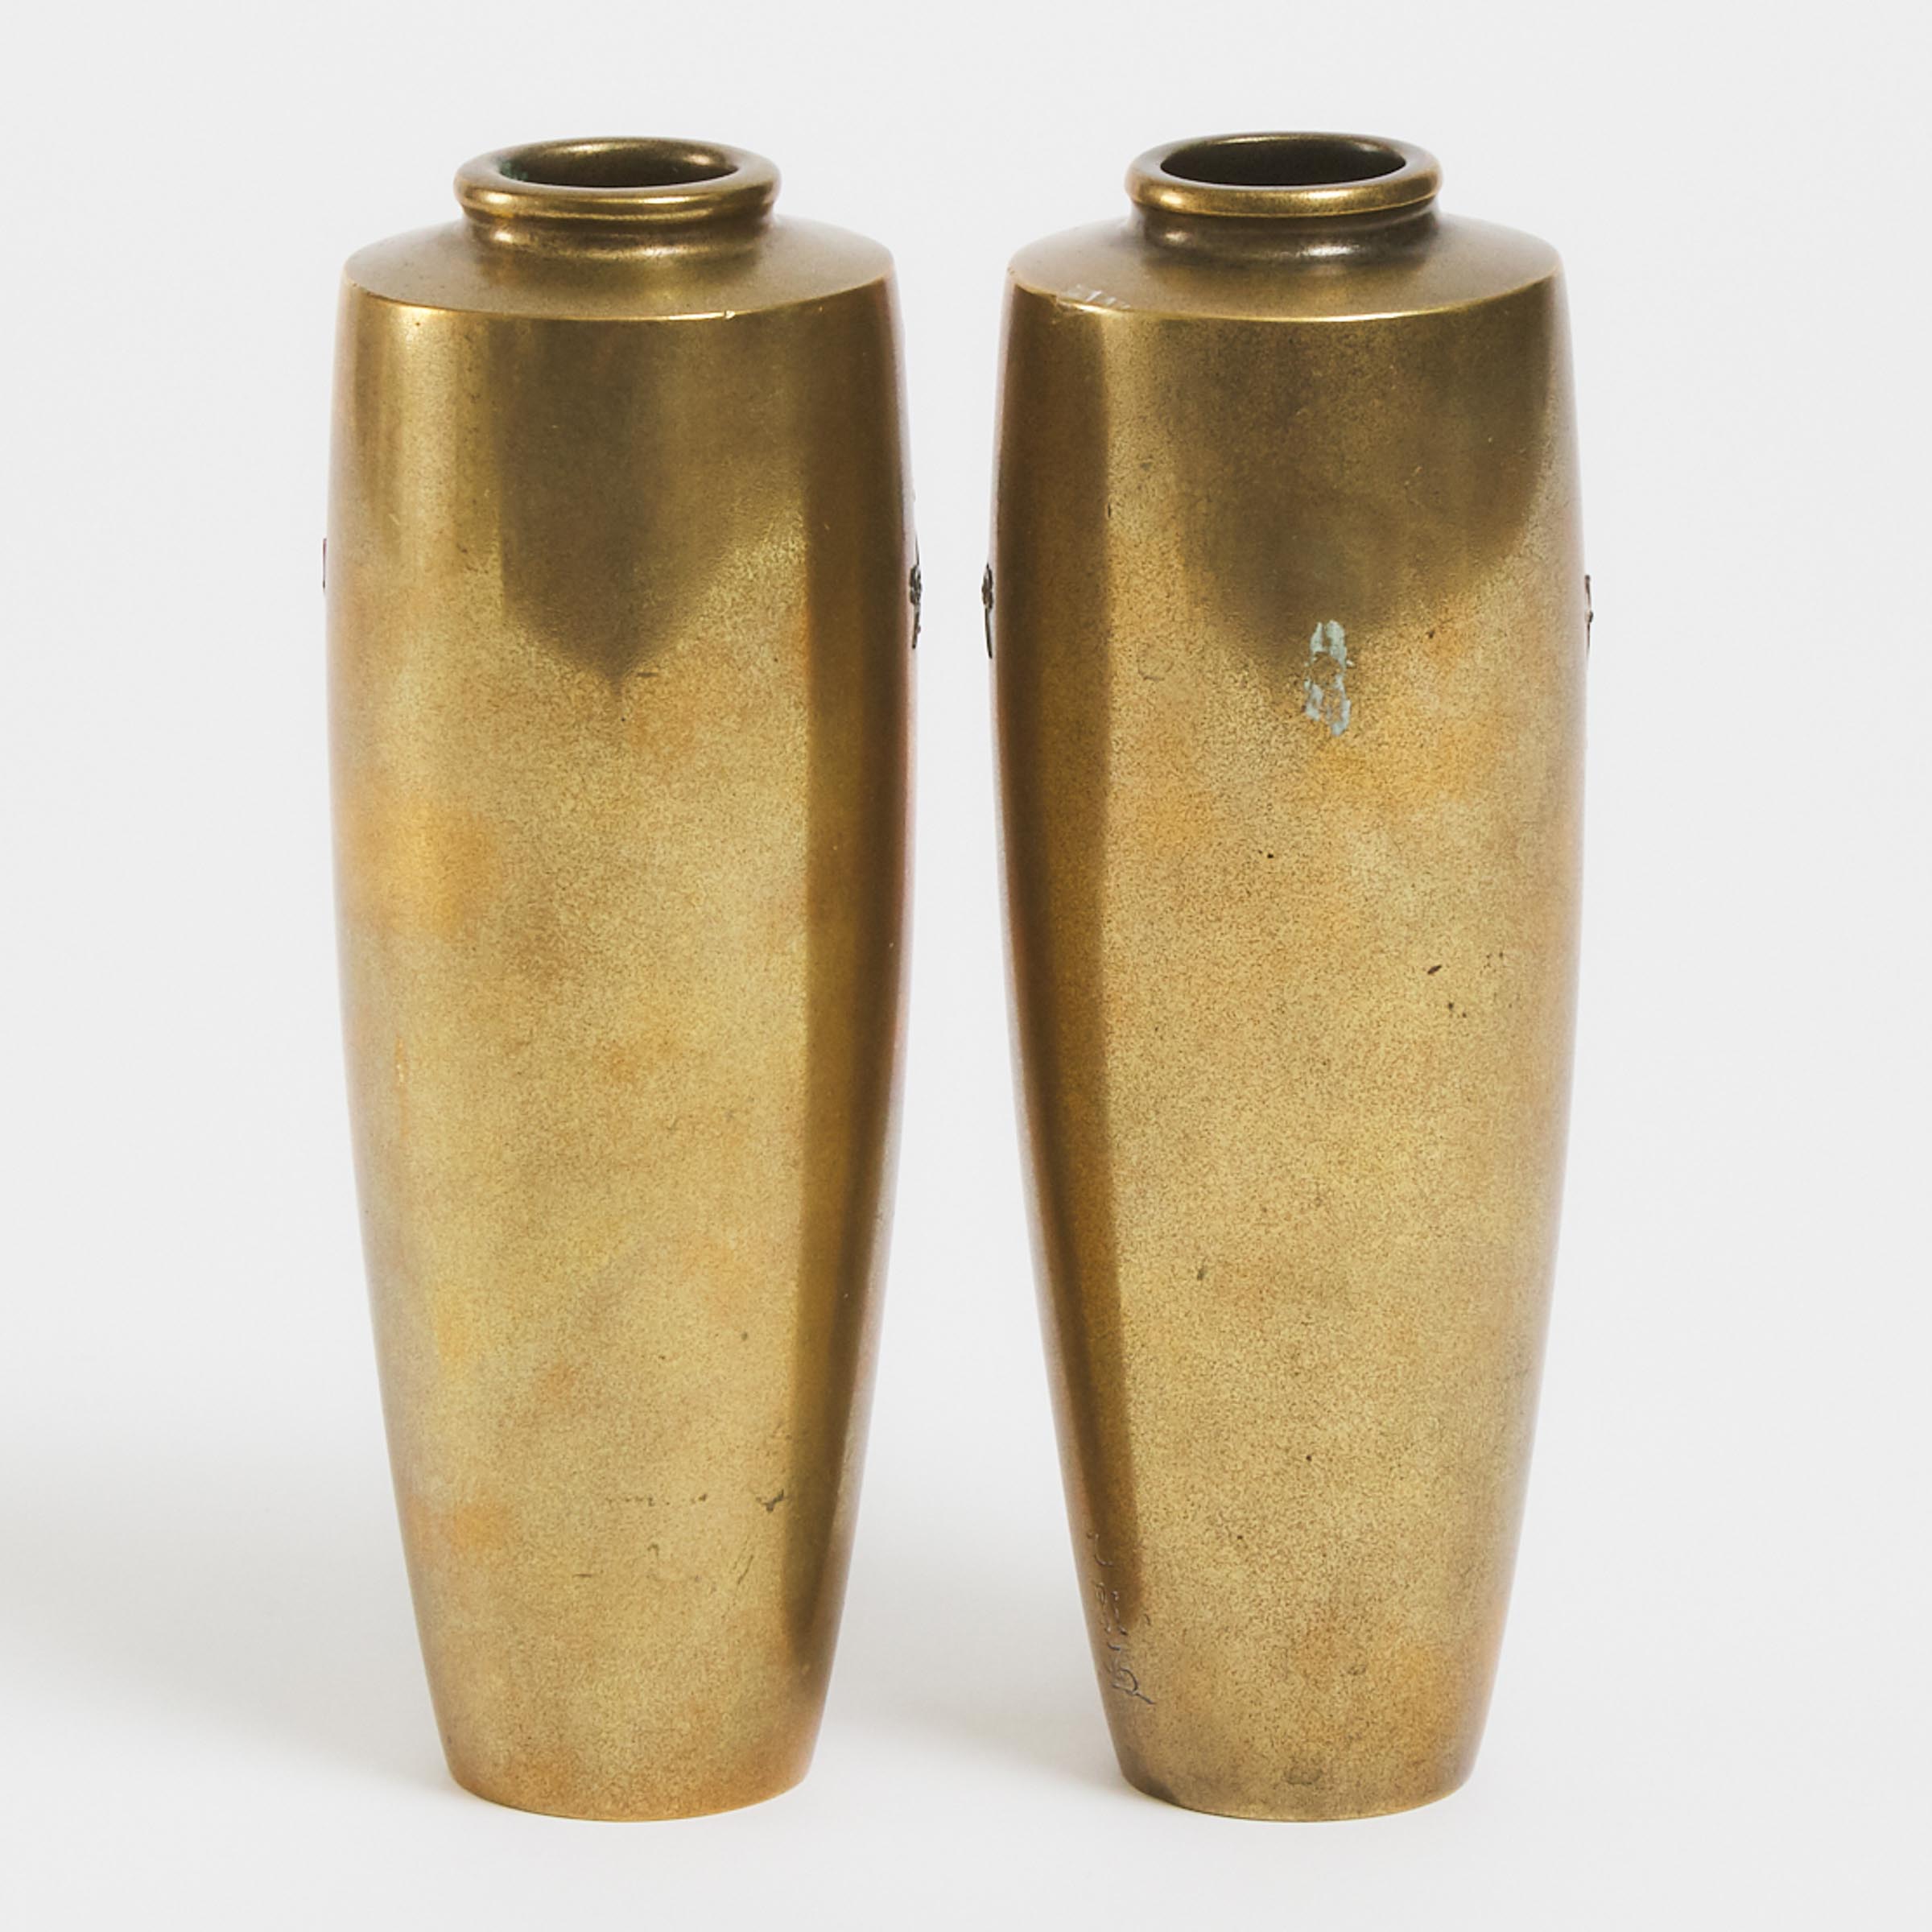 A Pair of Japanese Mixed-Metal Inlaid Bronze Vases, Meiji Period, Late 19th Century